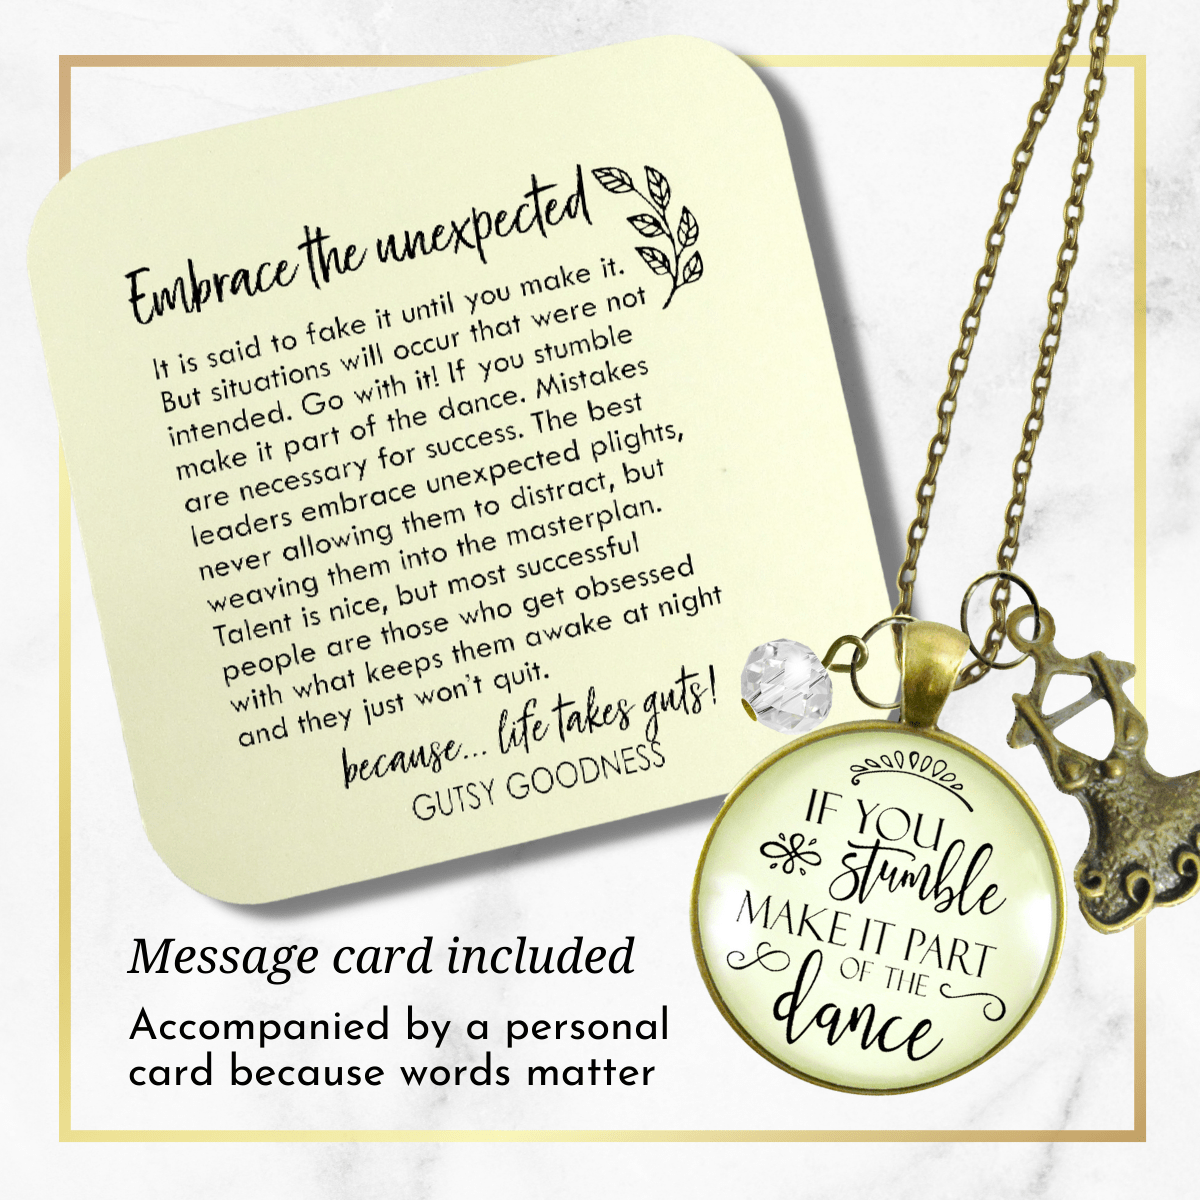 Gutsy Goodness Inspirational Necklace If You Stumble Dance Quote Jewelry Tutu Charm - Gutsy Goodness Handmade Jewelry;Inspirational Necklace If You Stumble Dance Quote Jewelry Tutu Charm - Gutsy Goodness Handmade Jewelry Gifts